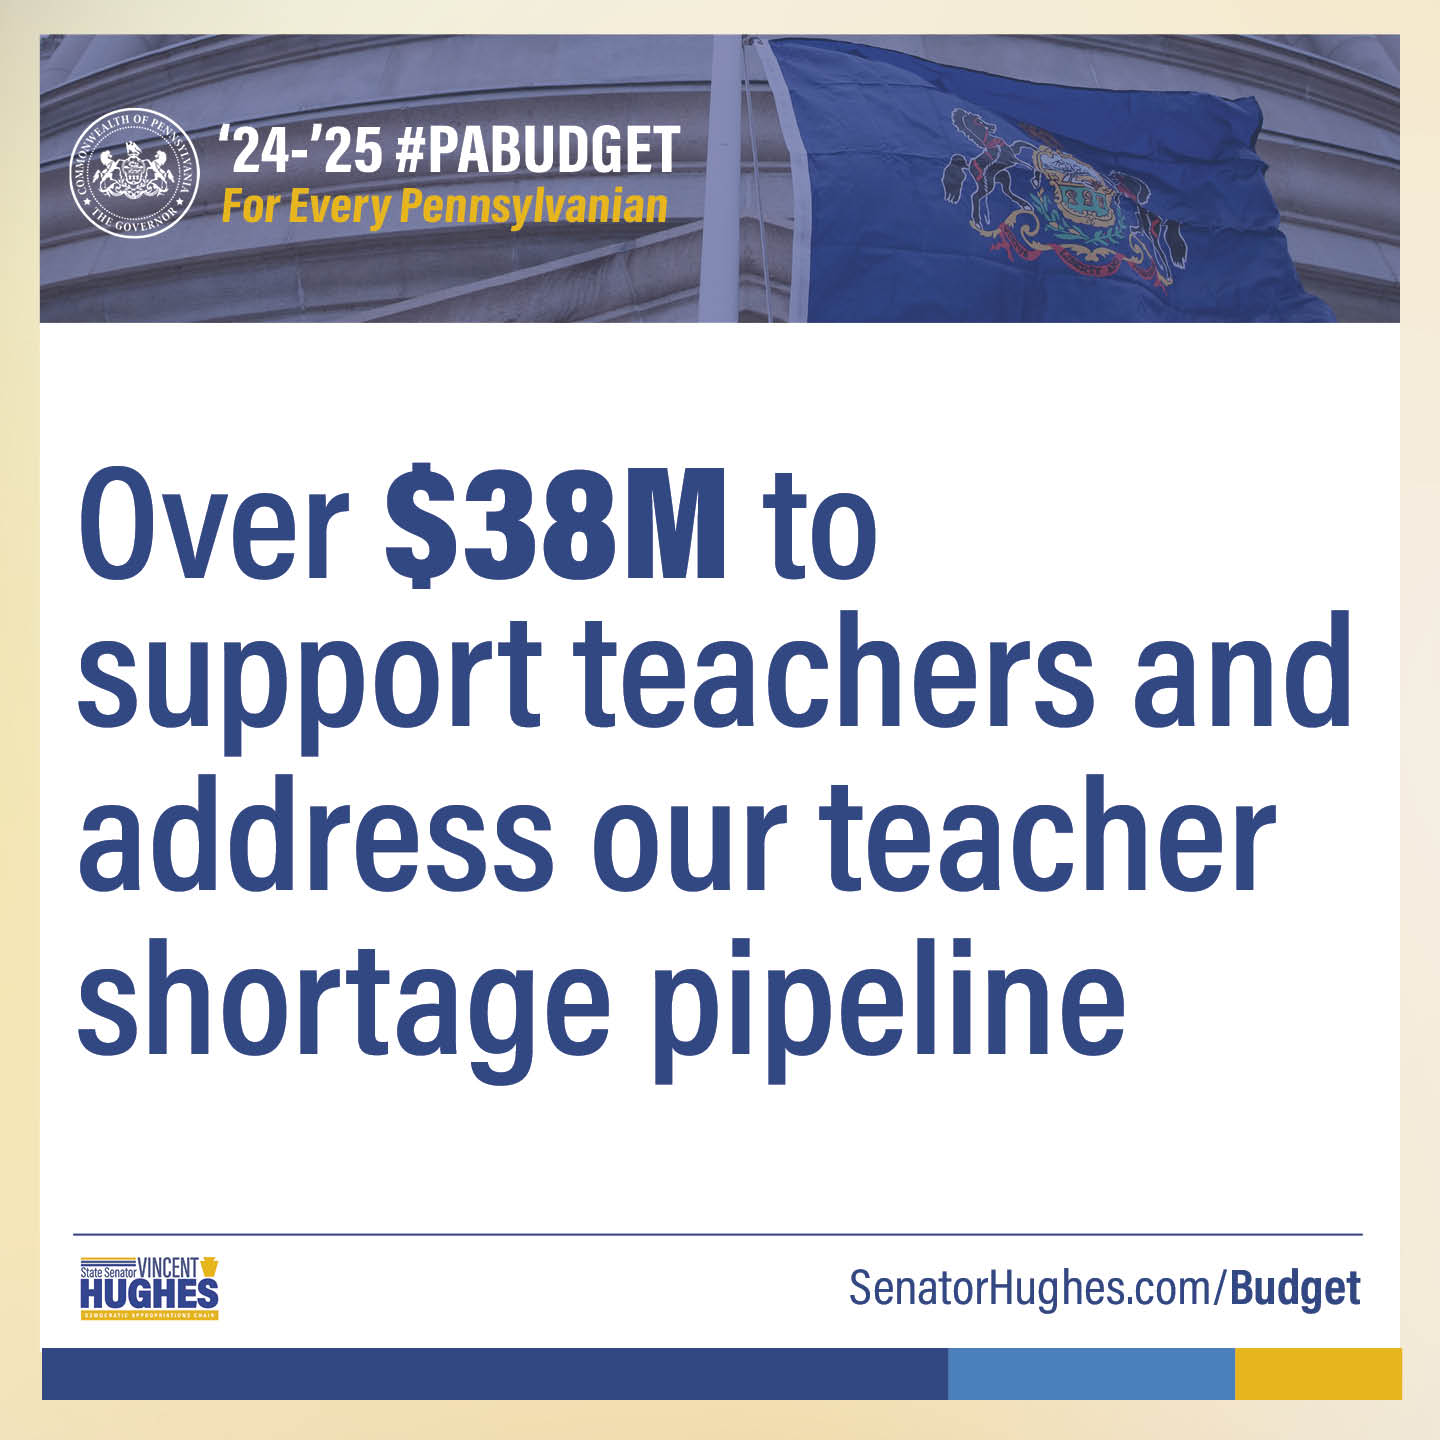 2024-25 Budget Address - Over $38M to support teachers and address shortage pipeline